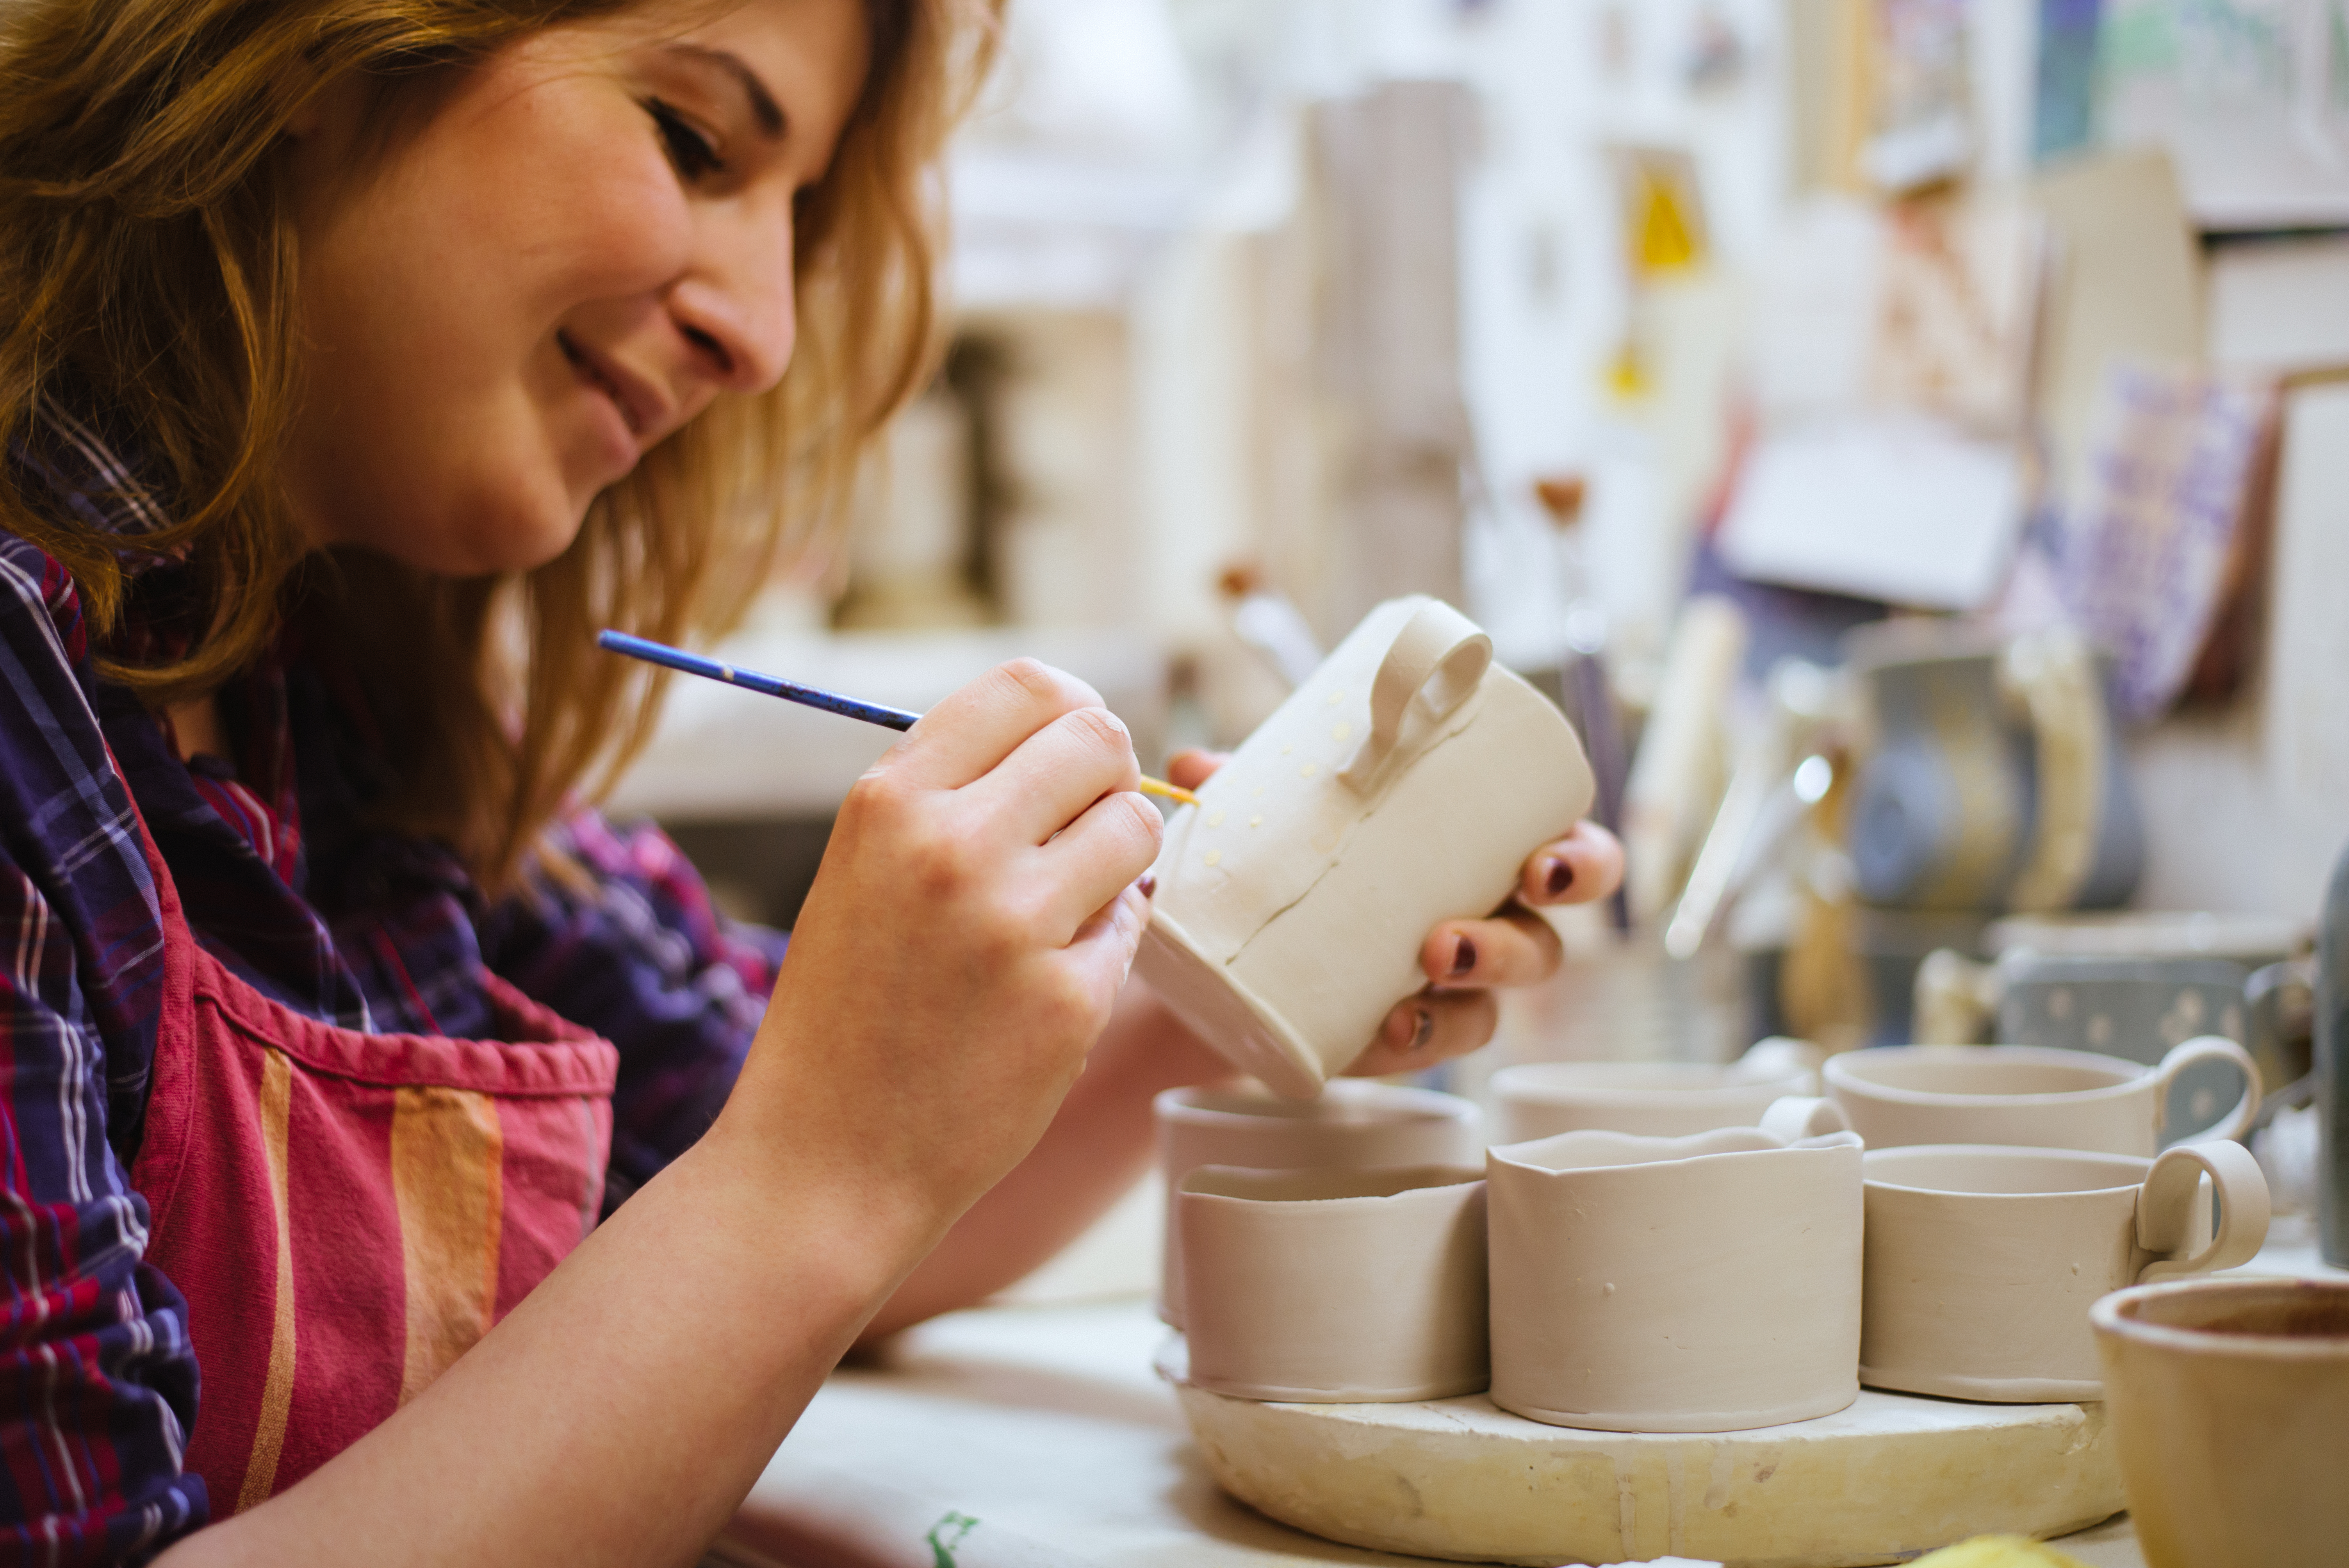 The wellbeing benefits of arts and crafts for adults